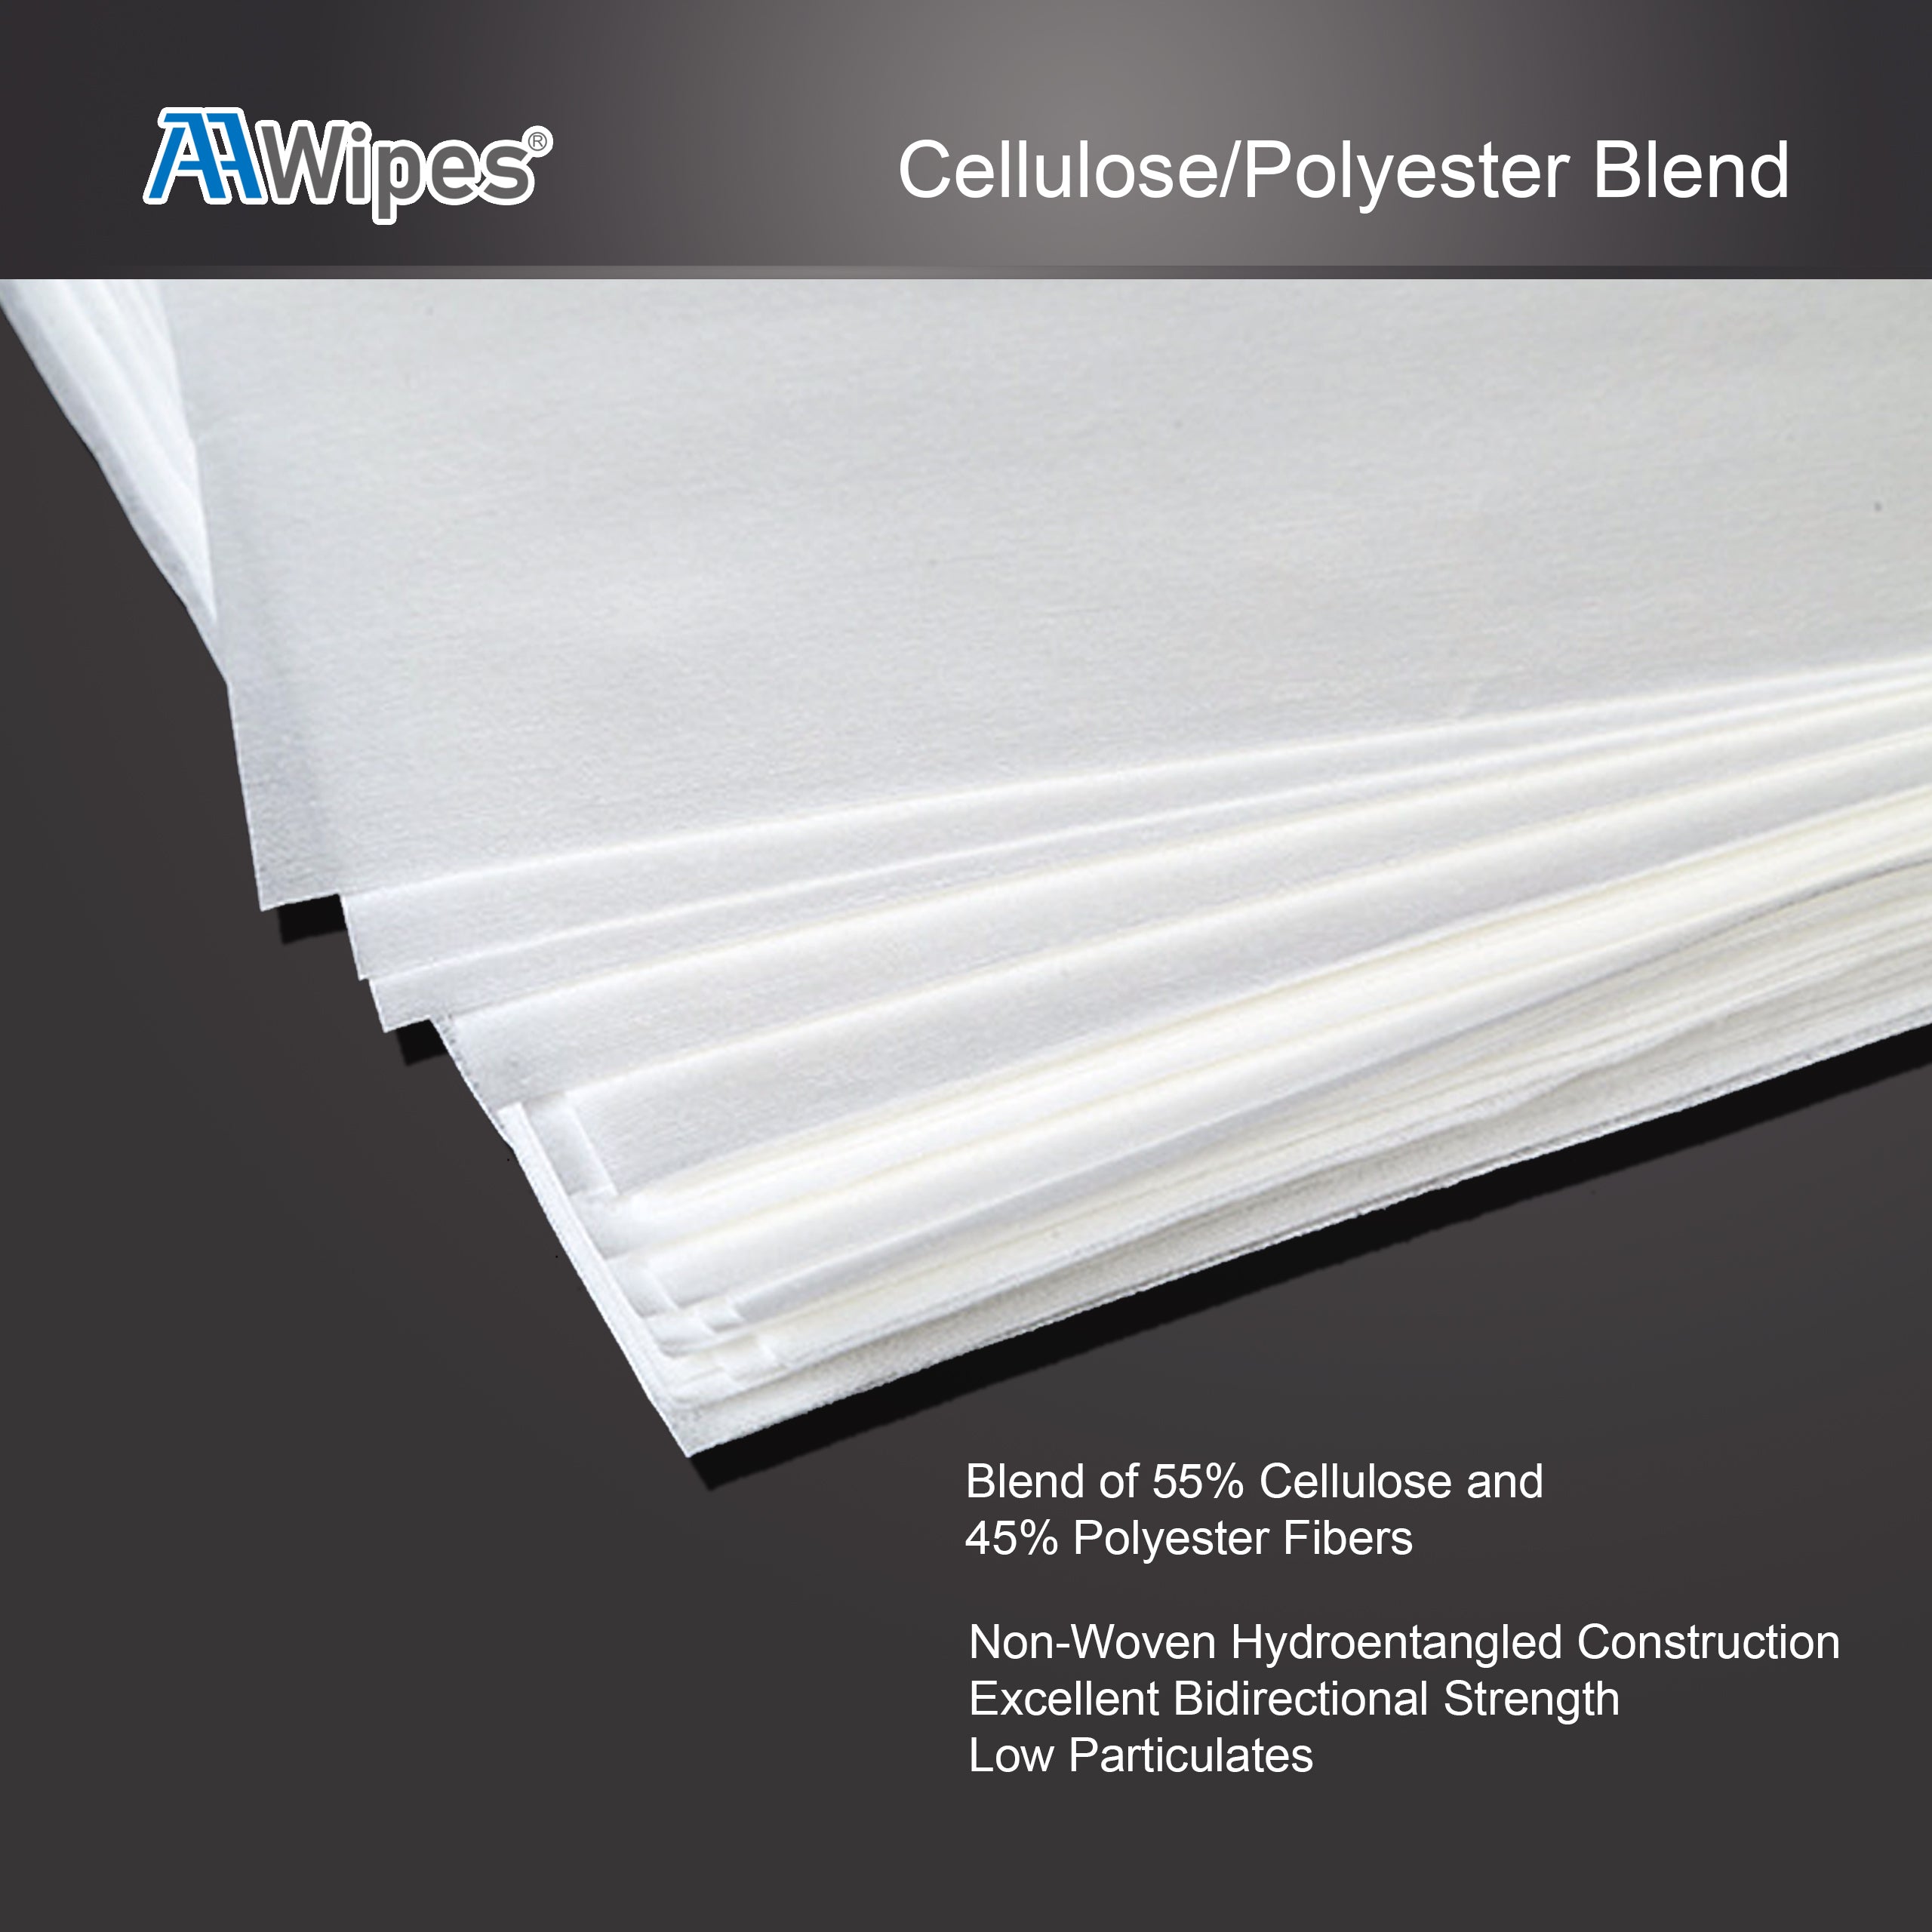 AAwipes Nonwoven Wipes: 12"x12" Cellulose/Polyester. 3,000 wipes/box in 20 bags (No. NW06812).